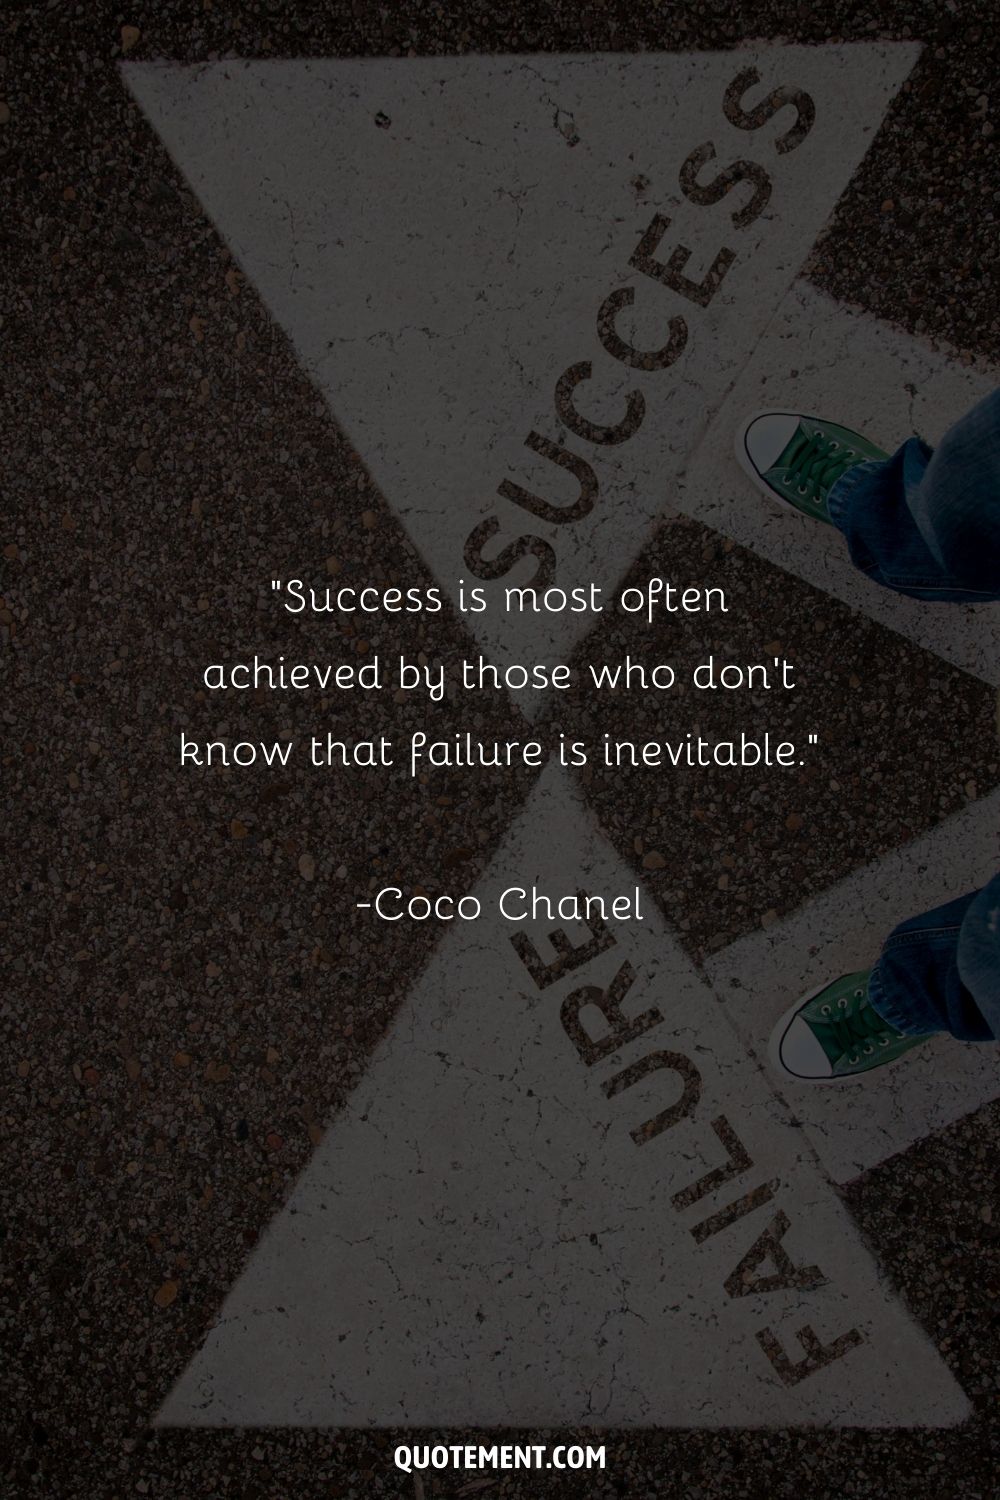 “Success is most often achieved by those who don't know that failure is inevitable.” ― Coco Chanel, Believing in Ourselves The Wisdom of Women